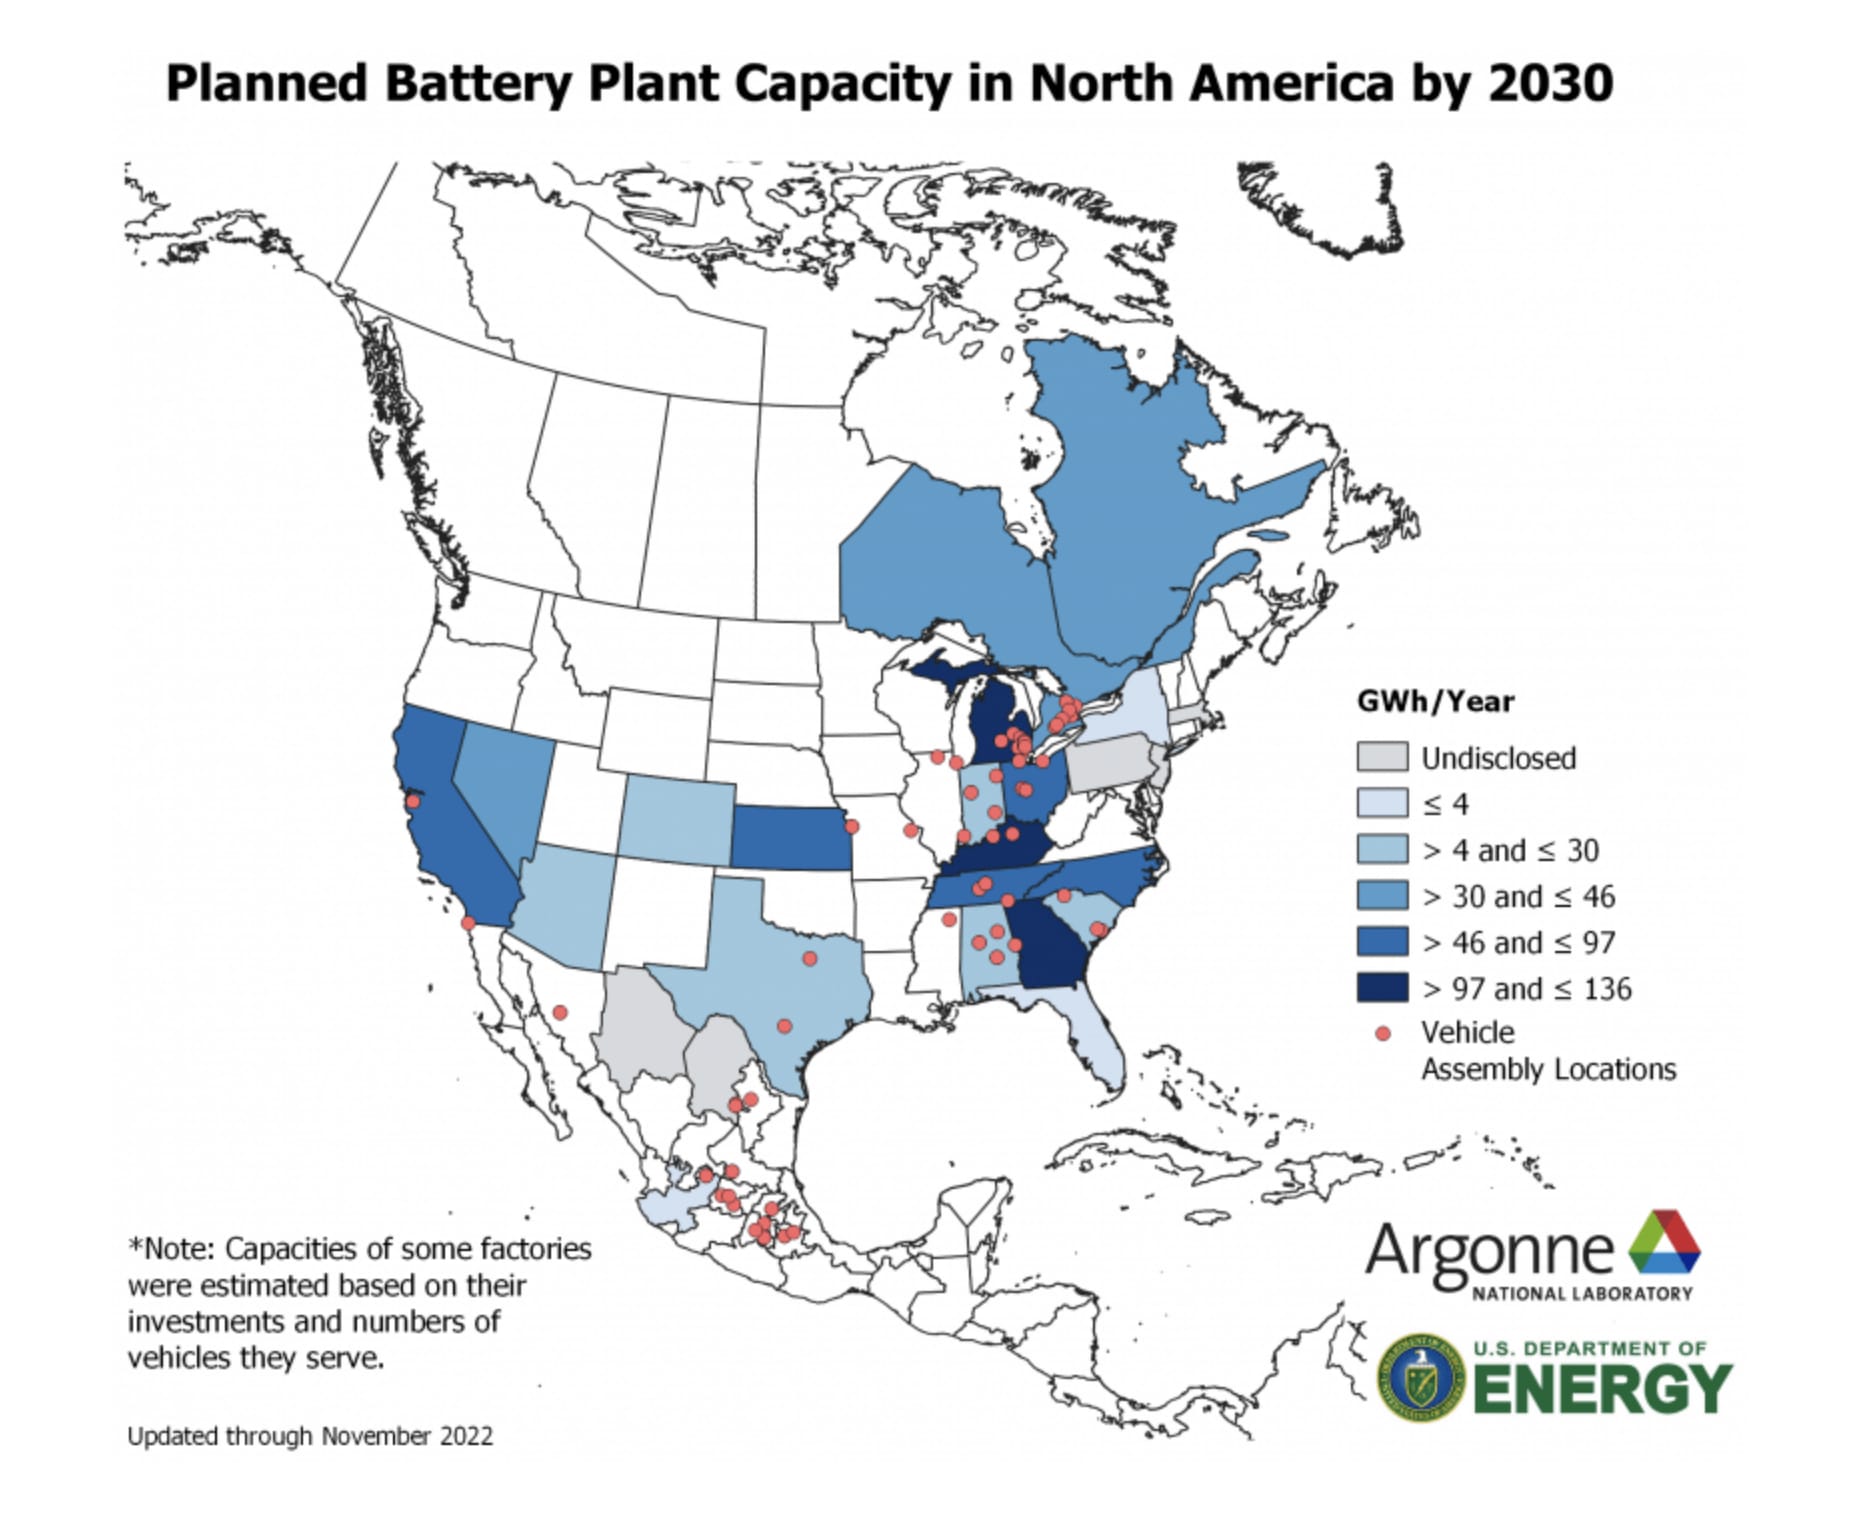 Planned electric vehicle battery plant capacity in North America by 2030. Data updated through November.